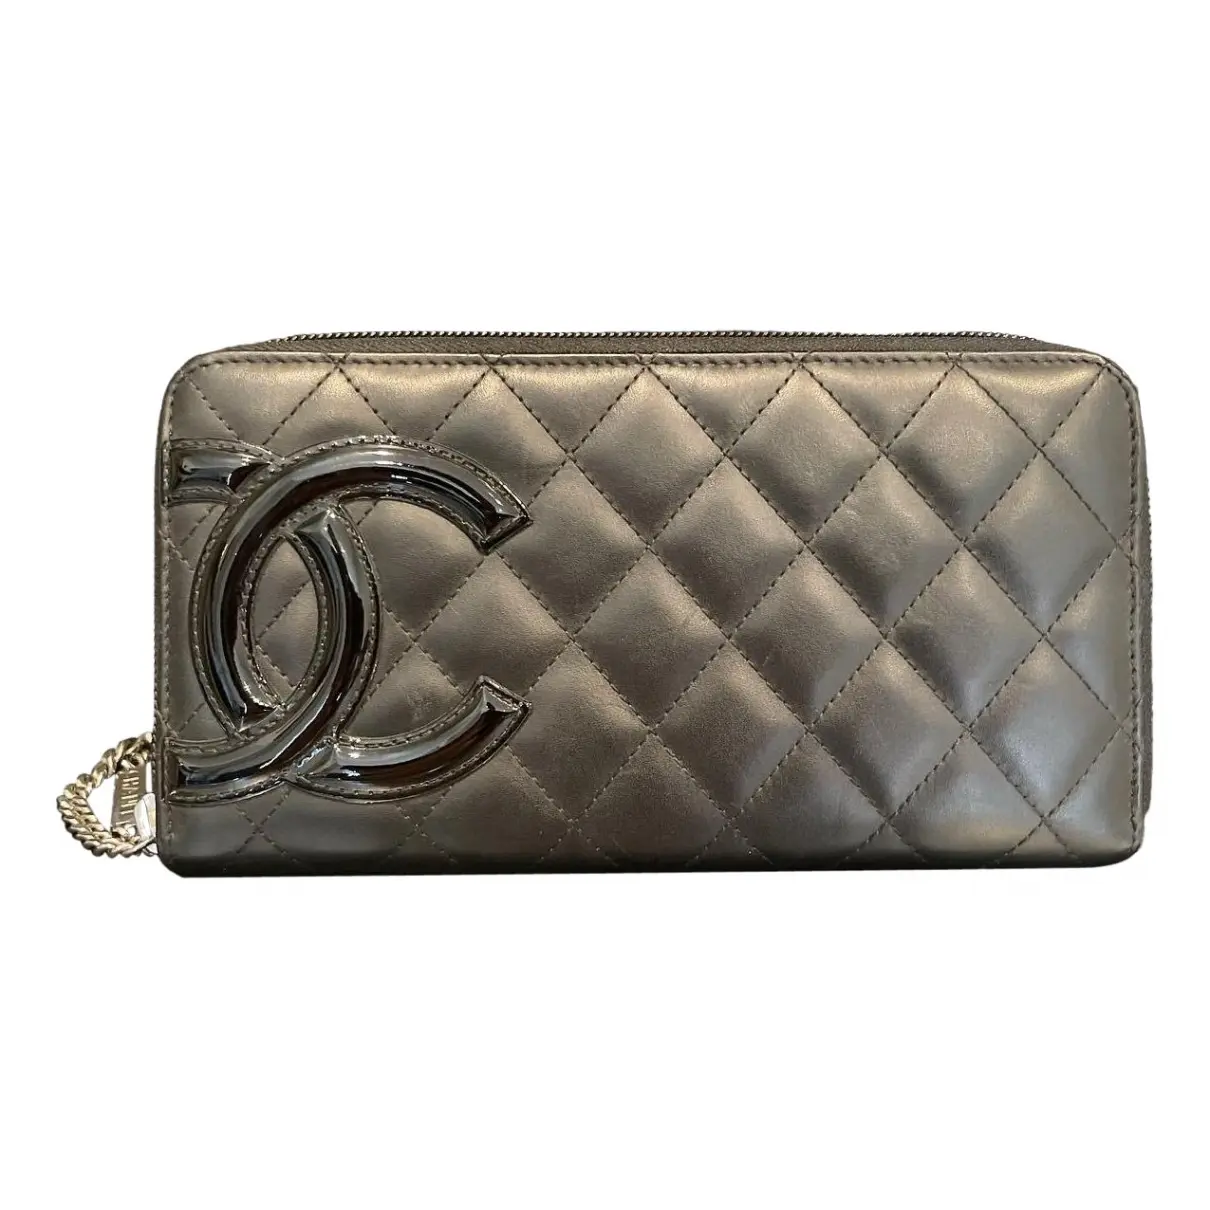 Wallet On Chain Cambon leather crossbody bag